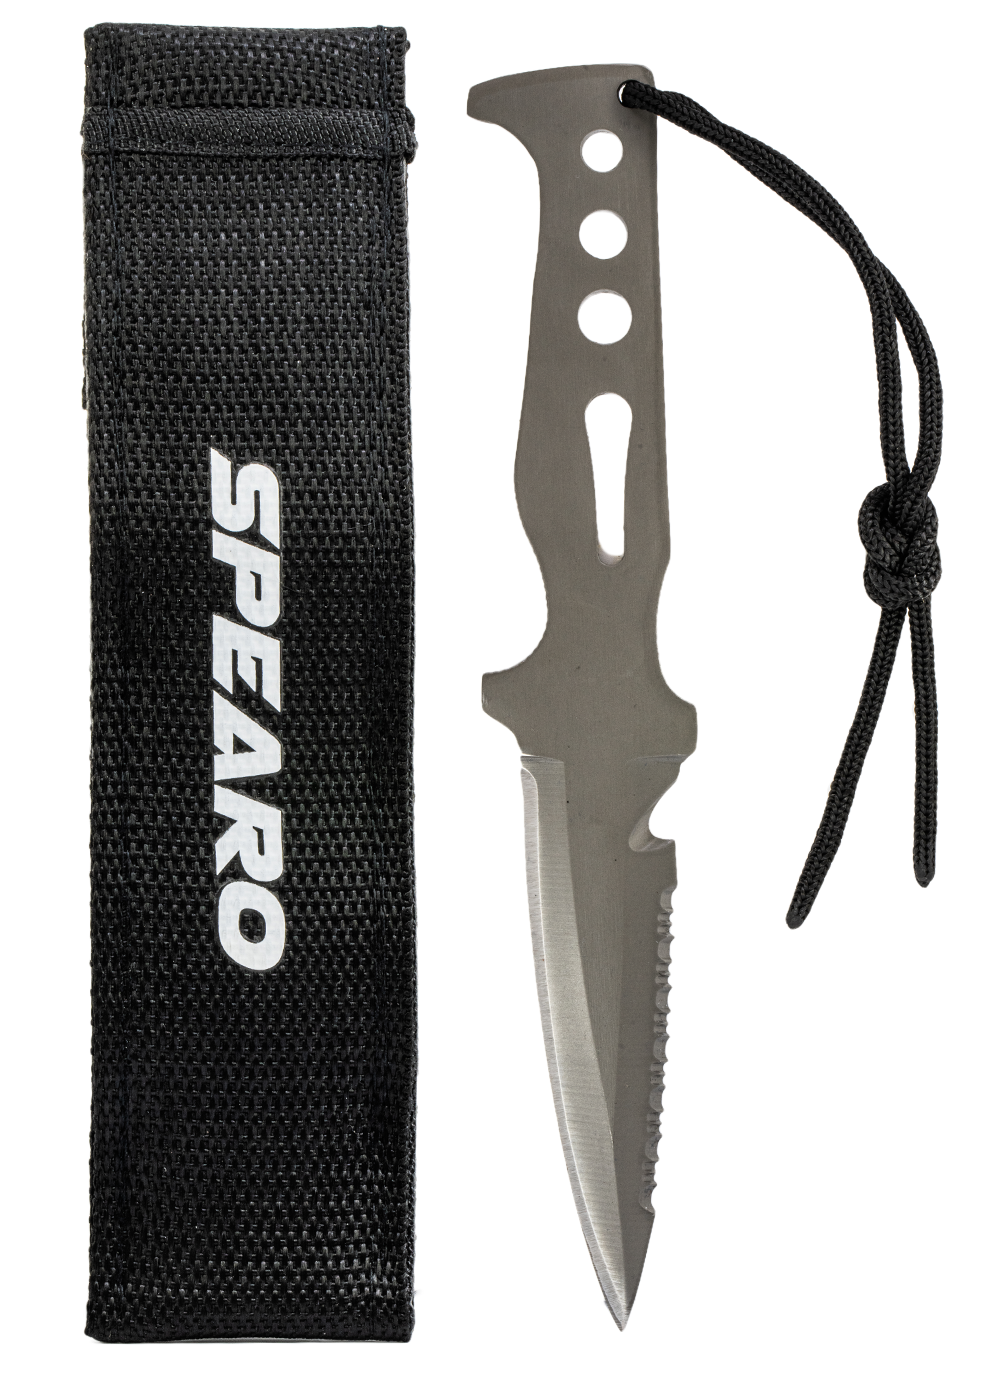 Spearo Slimline Dive Knife with Straps - Adreno - Ocean Outfitters